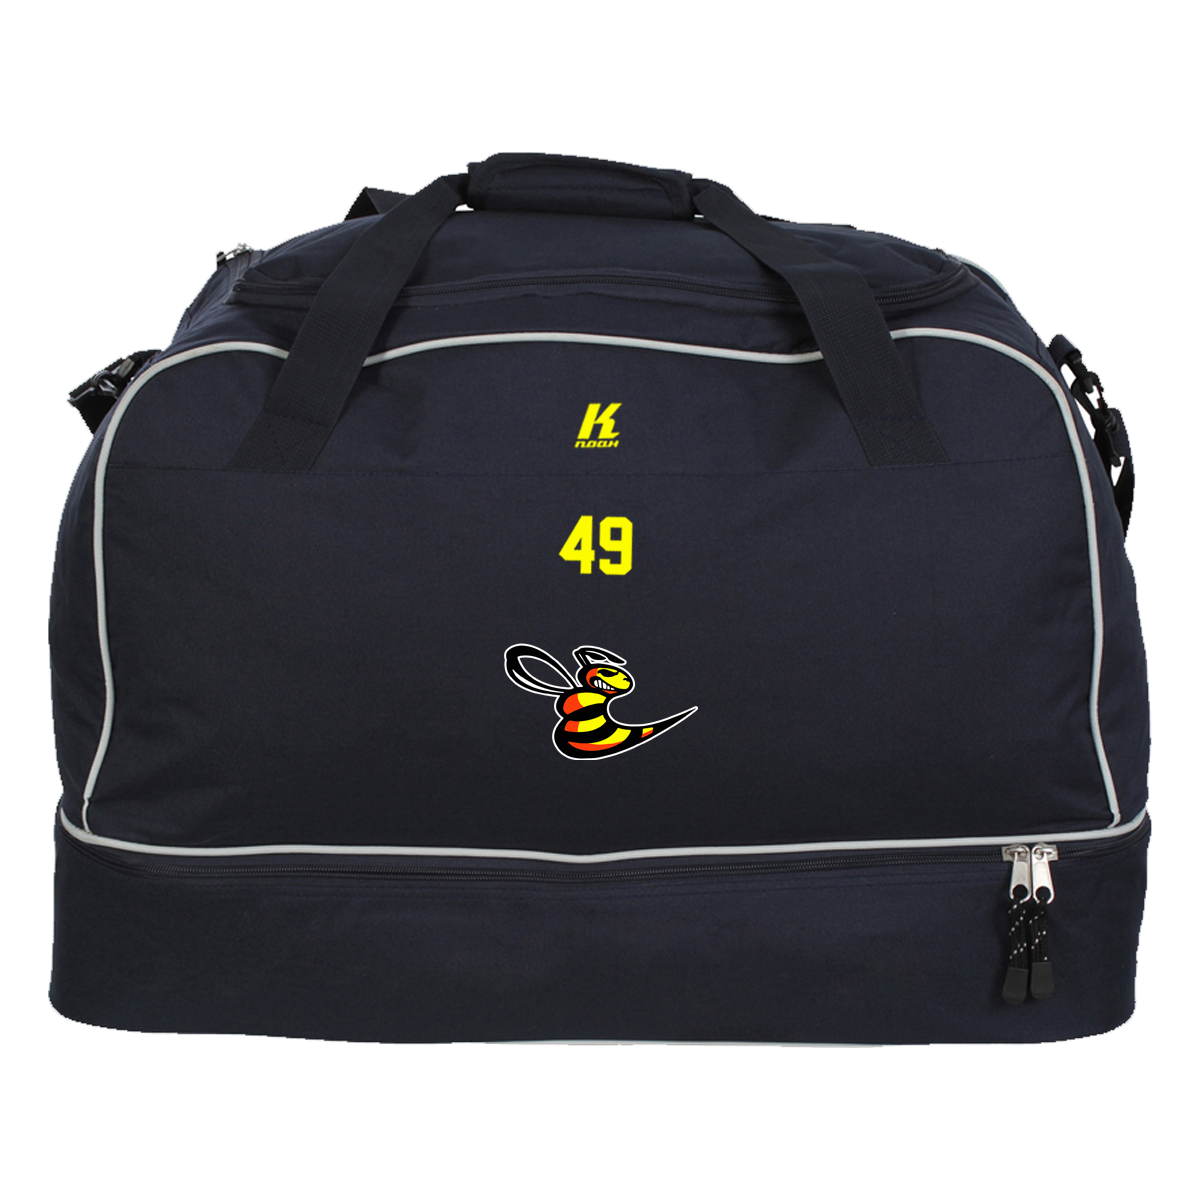 Hornets Players CT Bag with Playernumber or Initials